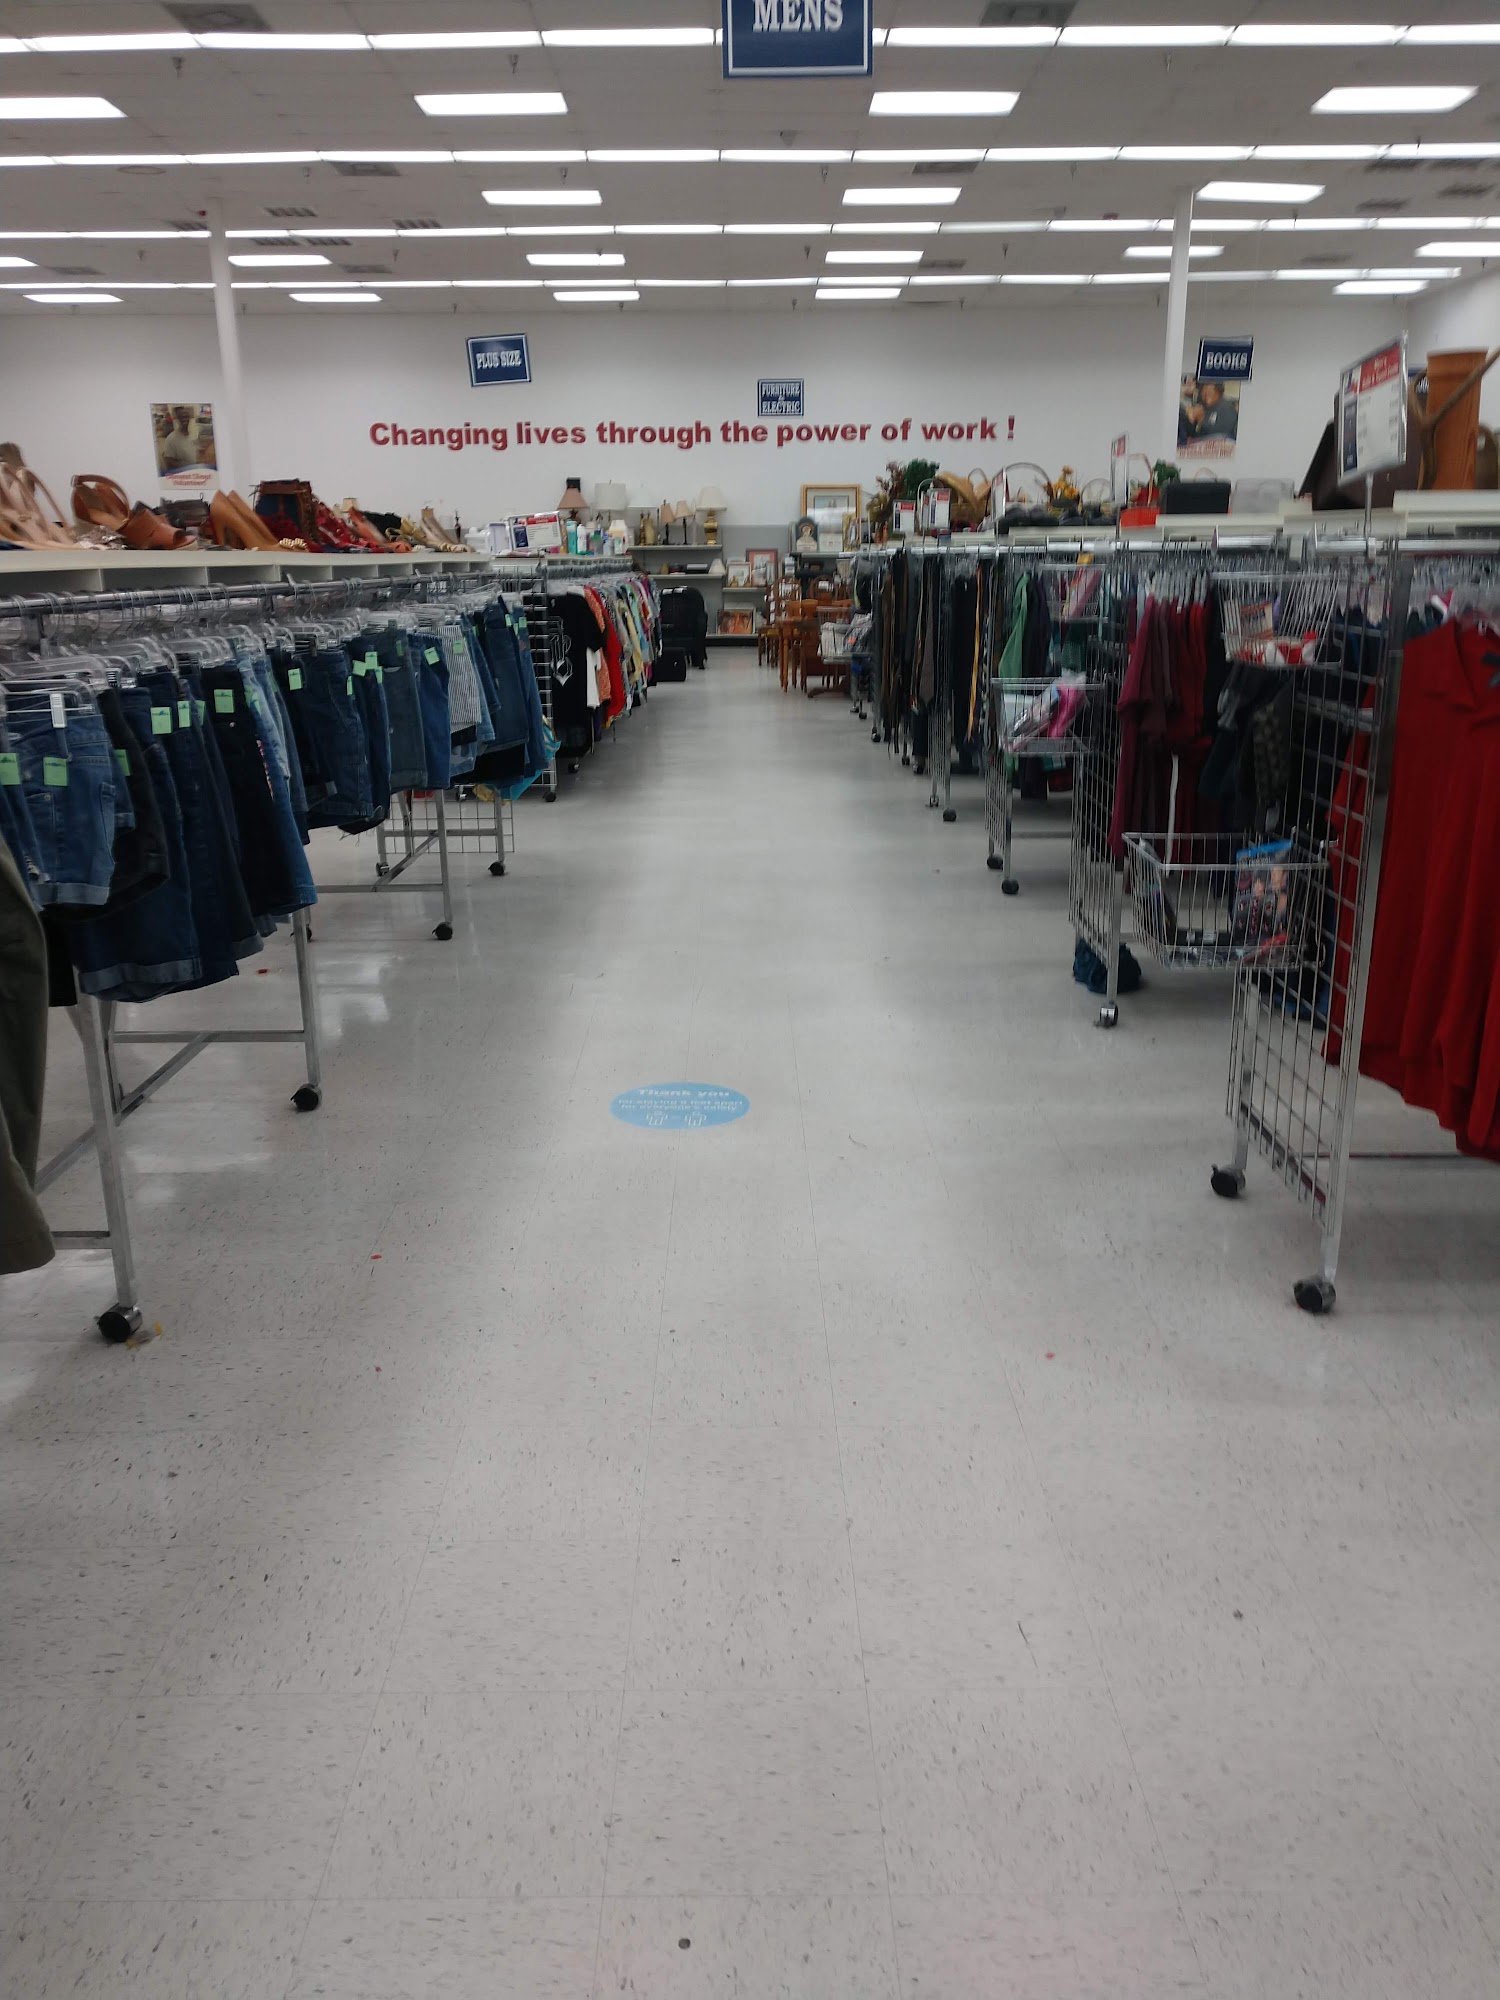 Goodwill Houston Select Stores